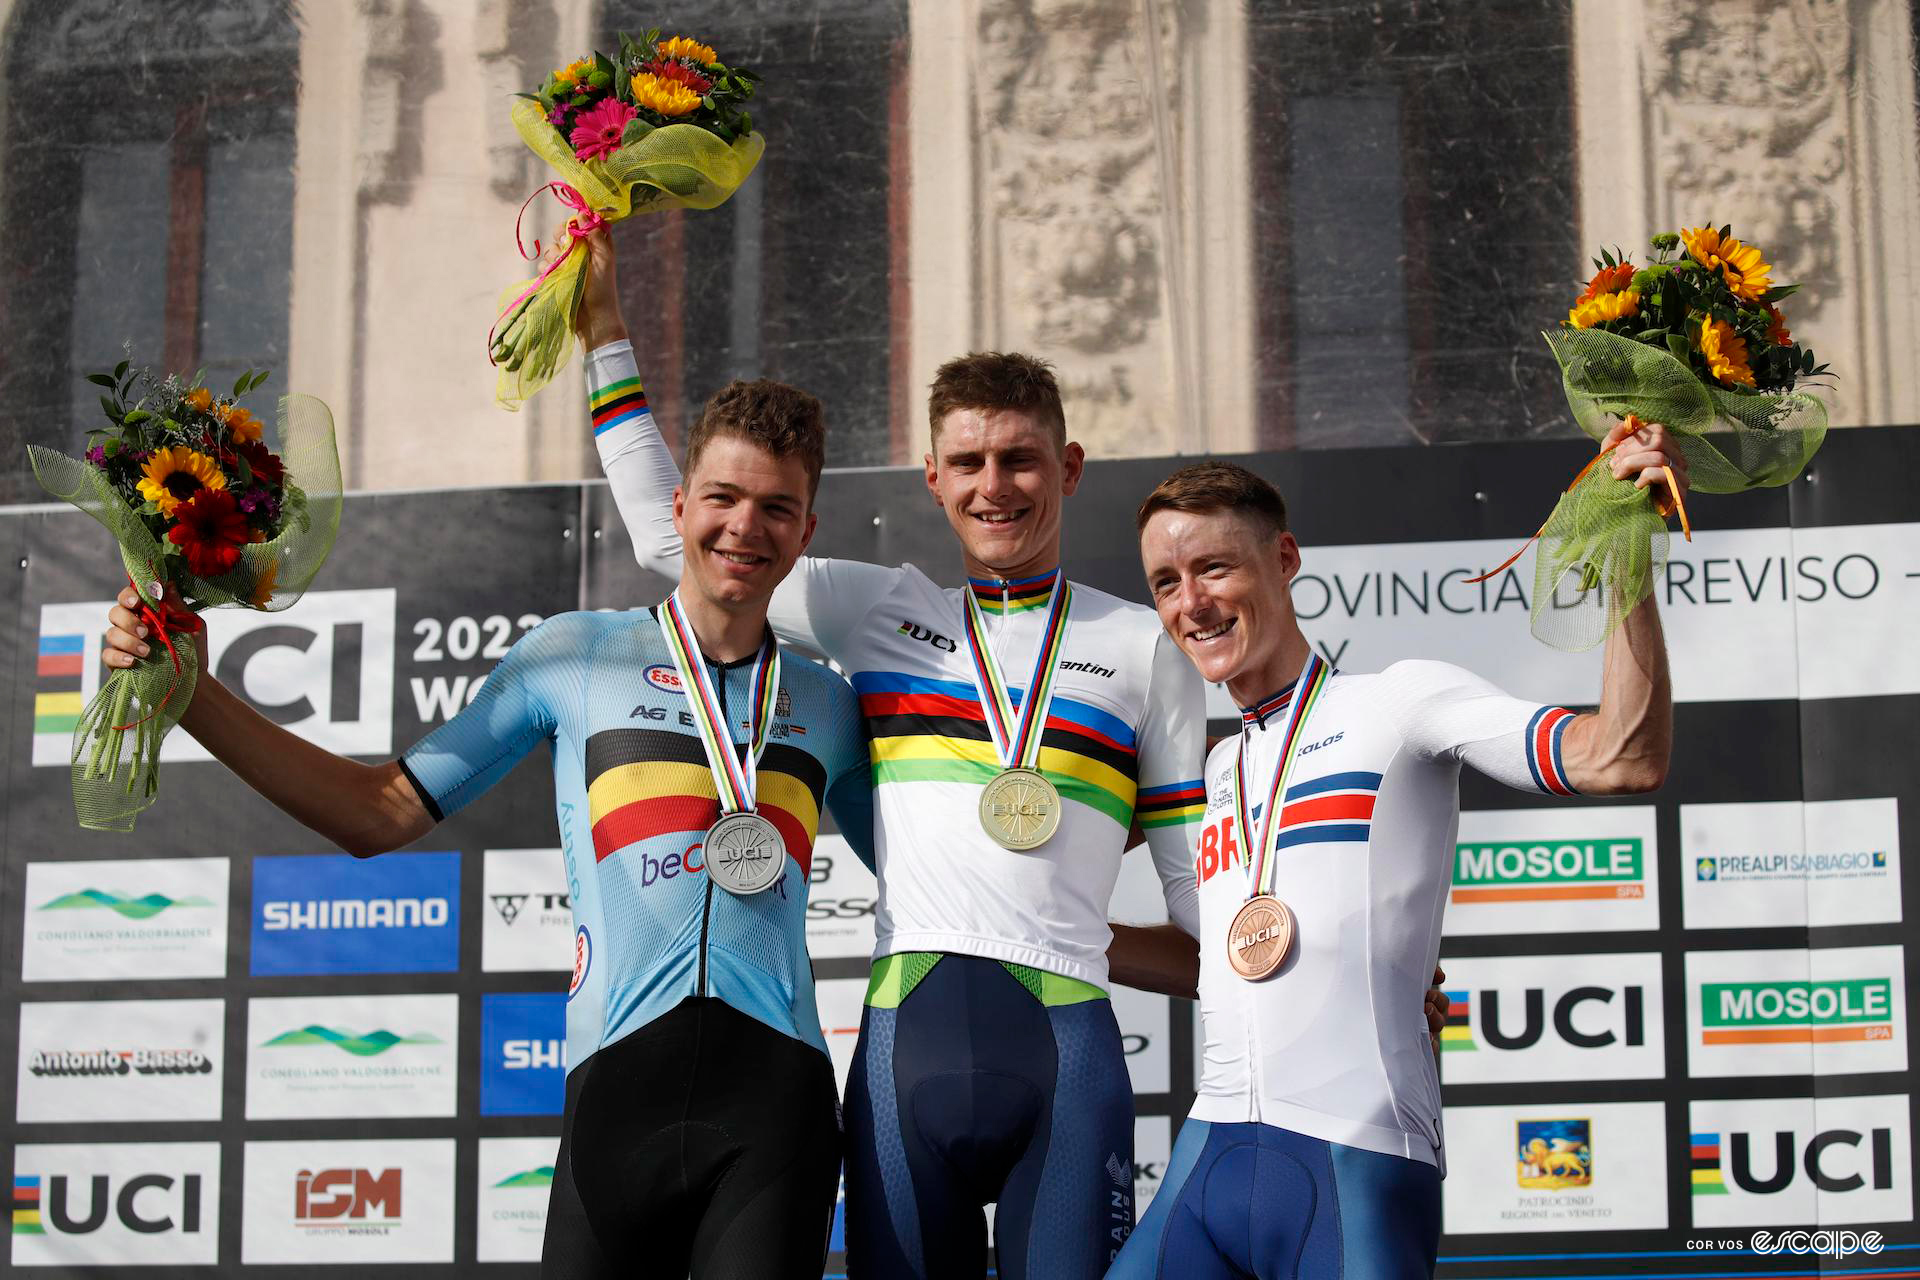 From left to right, second-place Florian Vermeersch, winner Matej Mohorič, and third-place Connor Swift on the podium of the 2023 gravel world championship men's race.